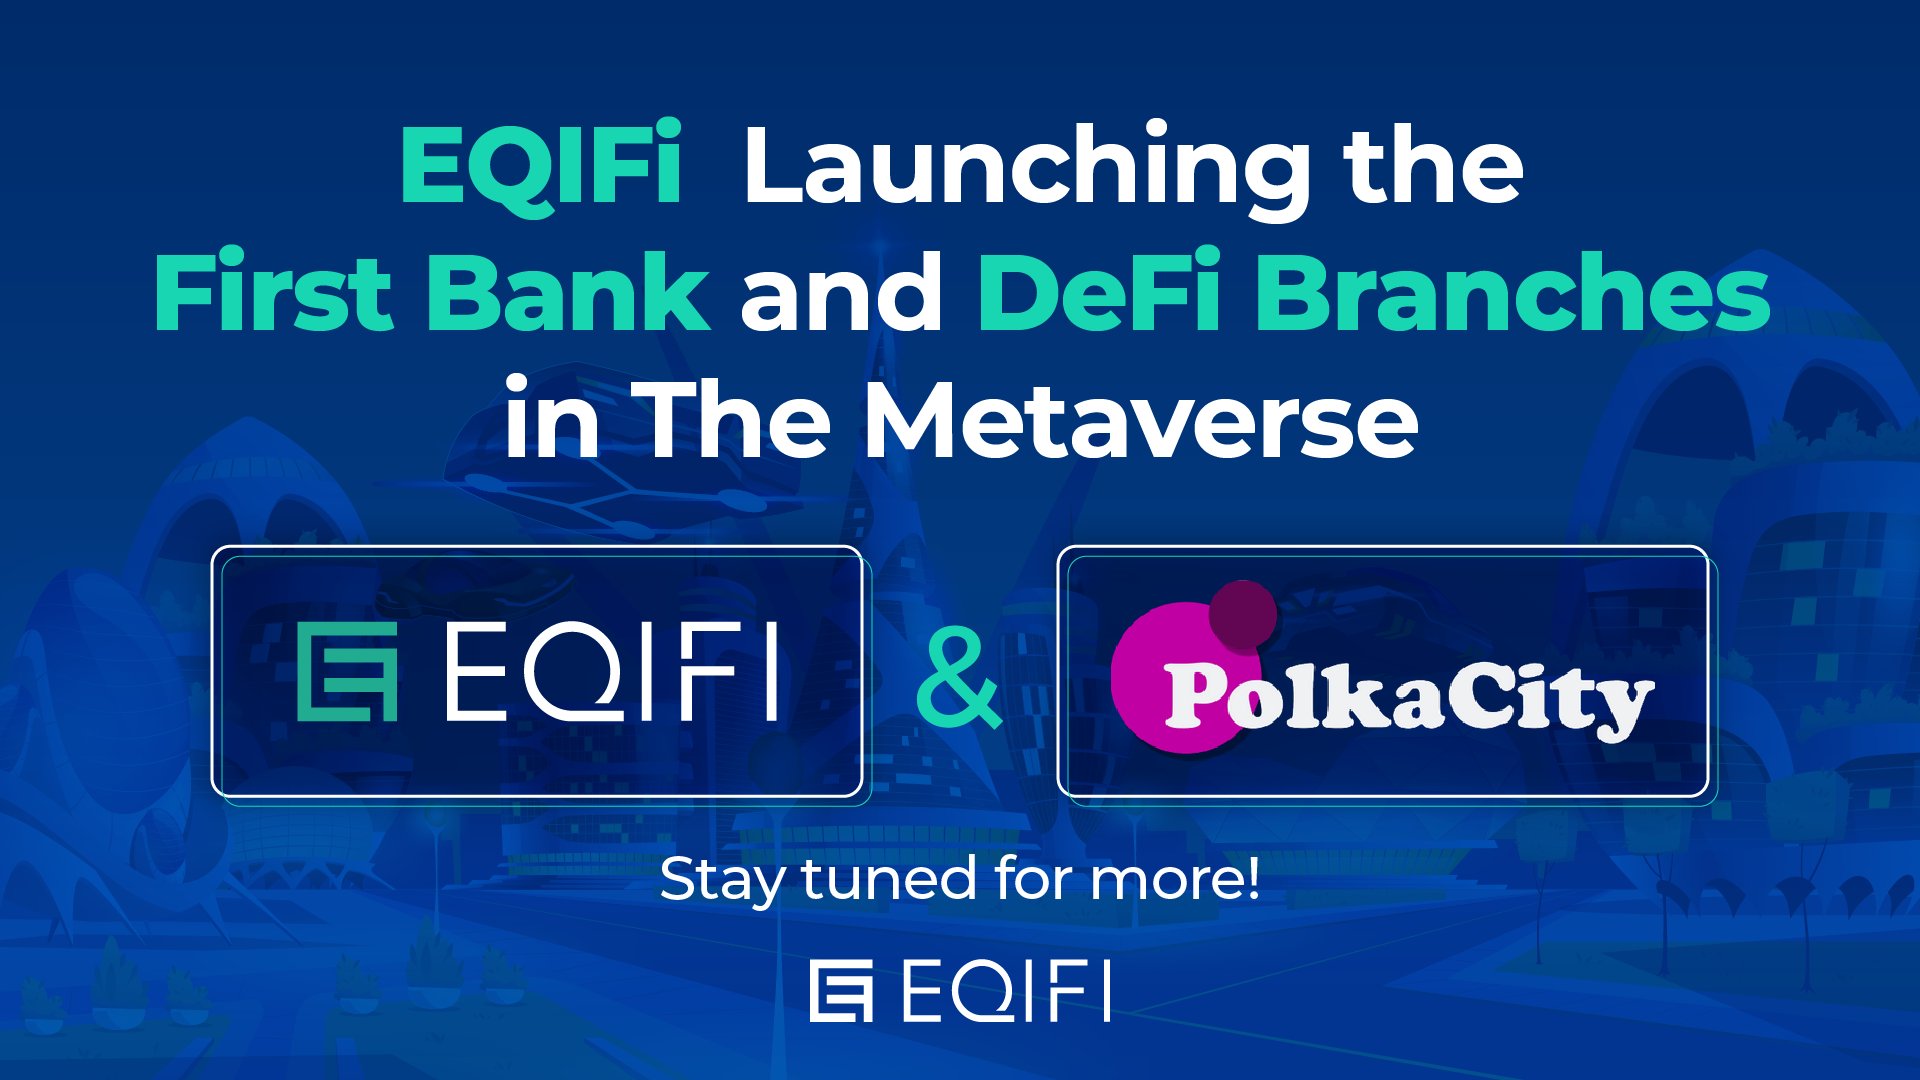 RT eqifi_finance: 🚀Who’s excited about the @PolkaCity x EQIFI partnership? 🌟EQIFi is launching the first bank and #DeFi branches in the #Metaverse 💳So get the limited edition #NFT EQIFi cards with real-life benefits here.. 🔻[polkacity.io]  #EQIFi #Polkacity #EQIBank $EQX #Crypto #NFTs [twitter.com] [pbs.twimg.com]